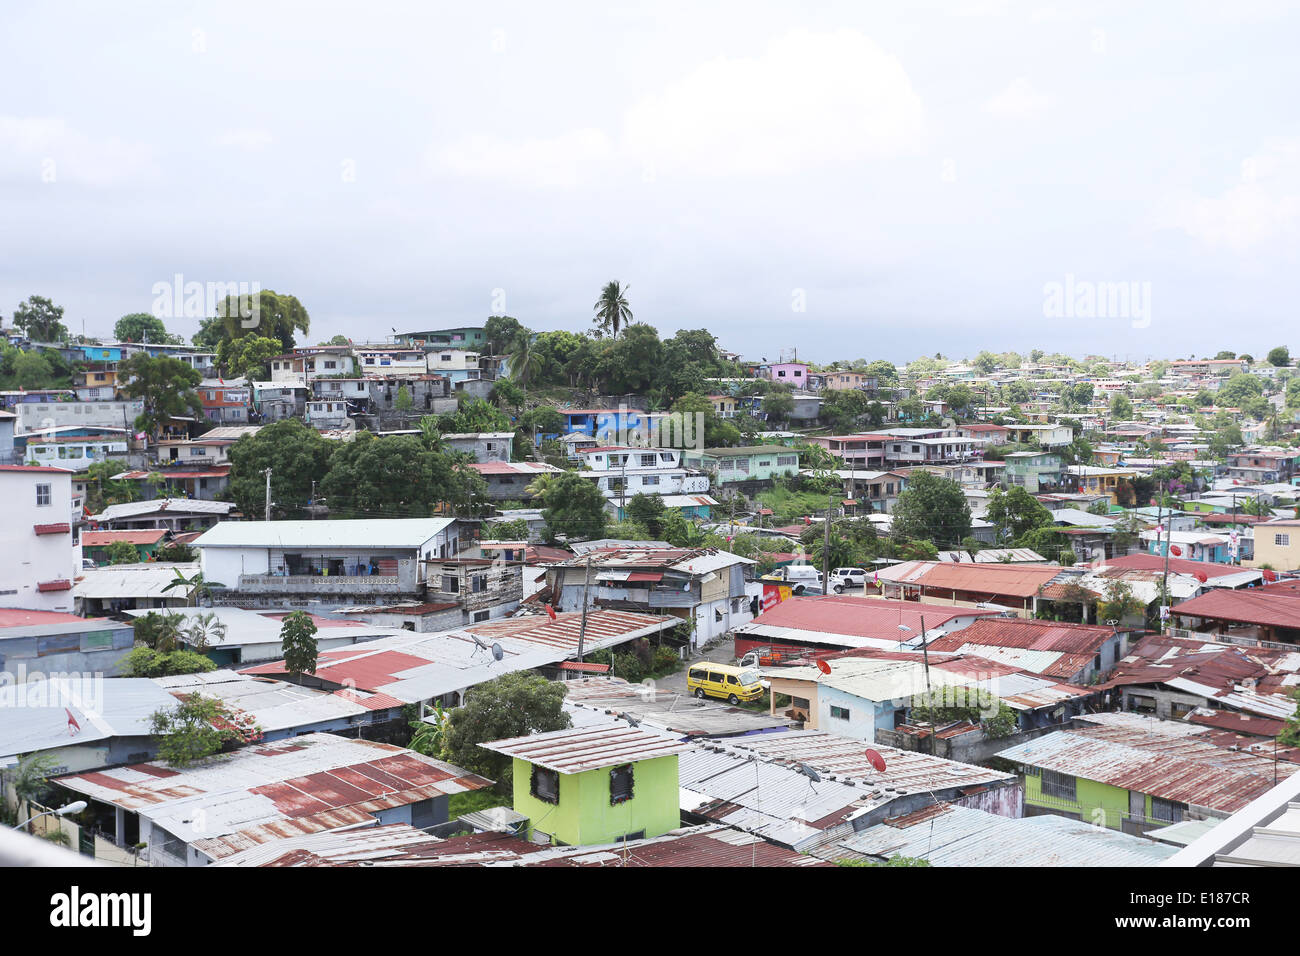 Aerial view of shanty towns in Panama City, Panama Stock Photo